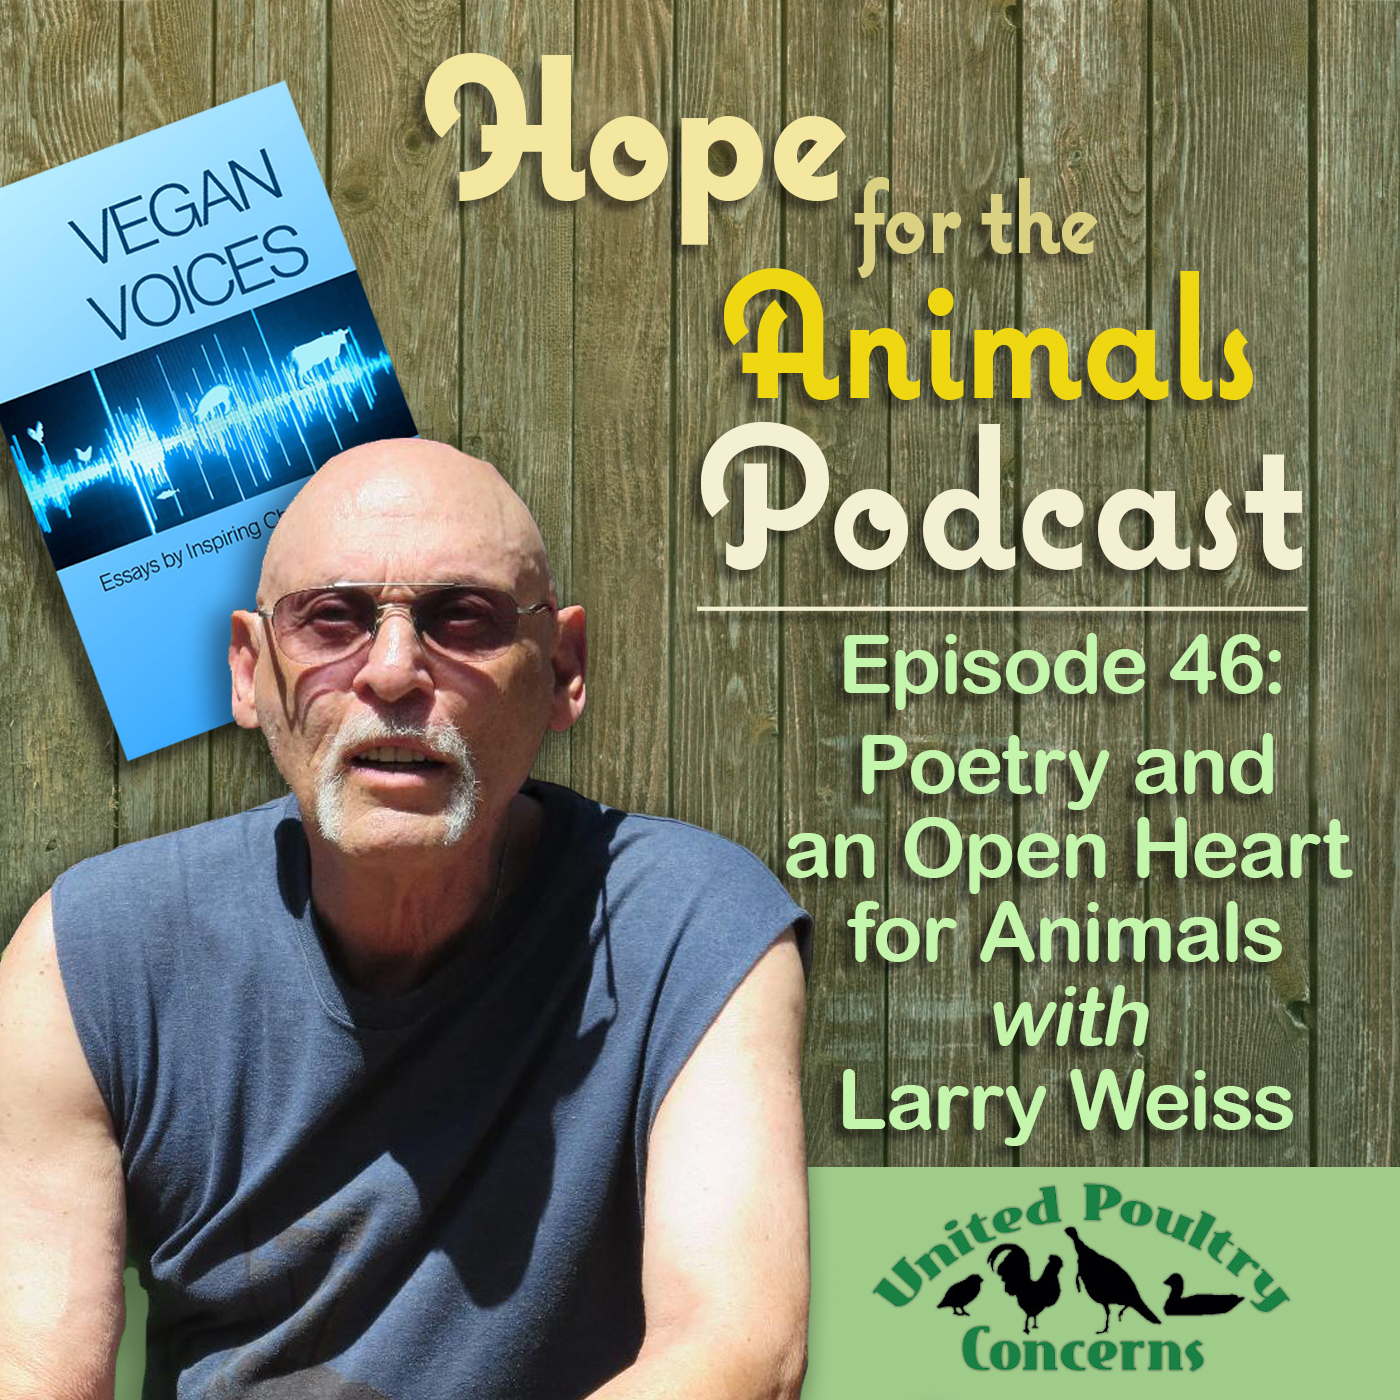 Episode 46: Poetry and an Open Heart for Animals with Larry Weiss